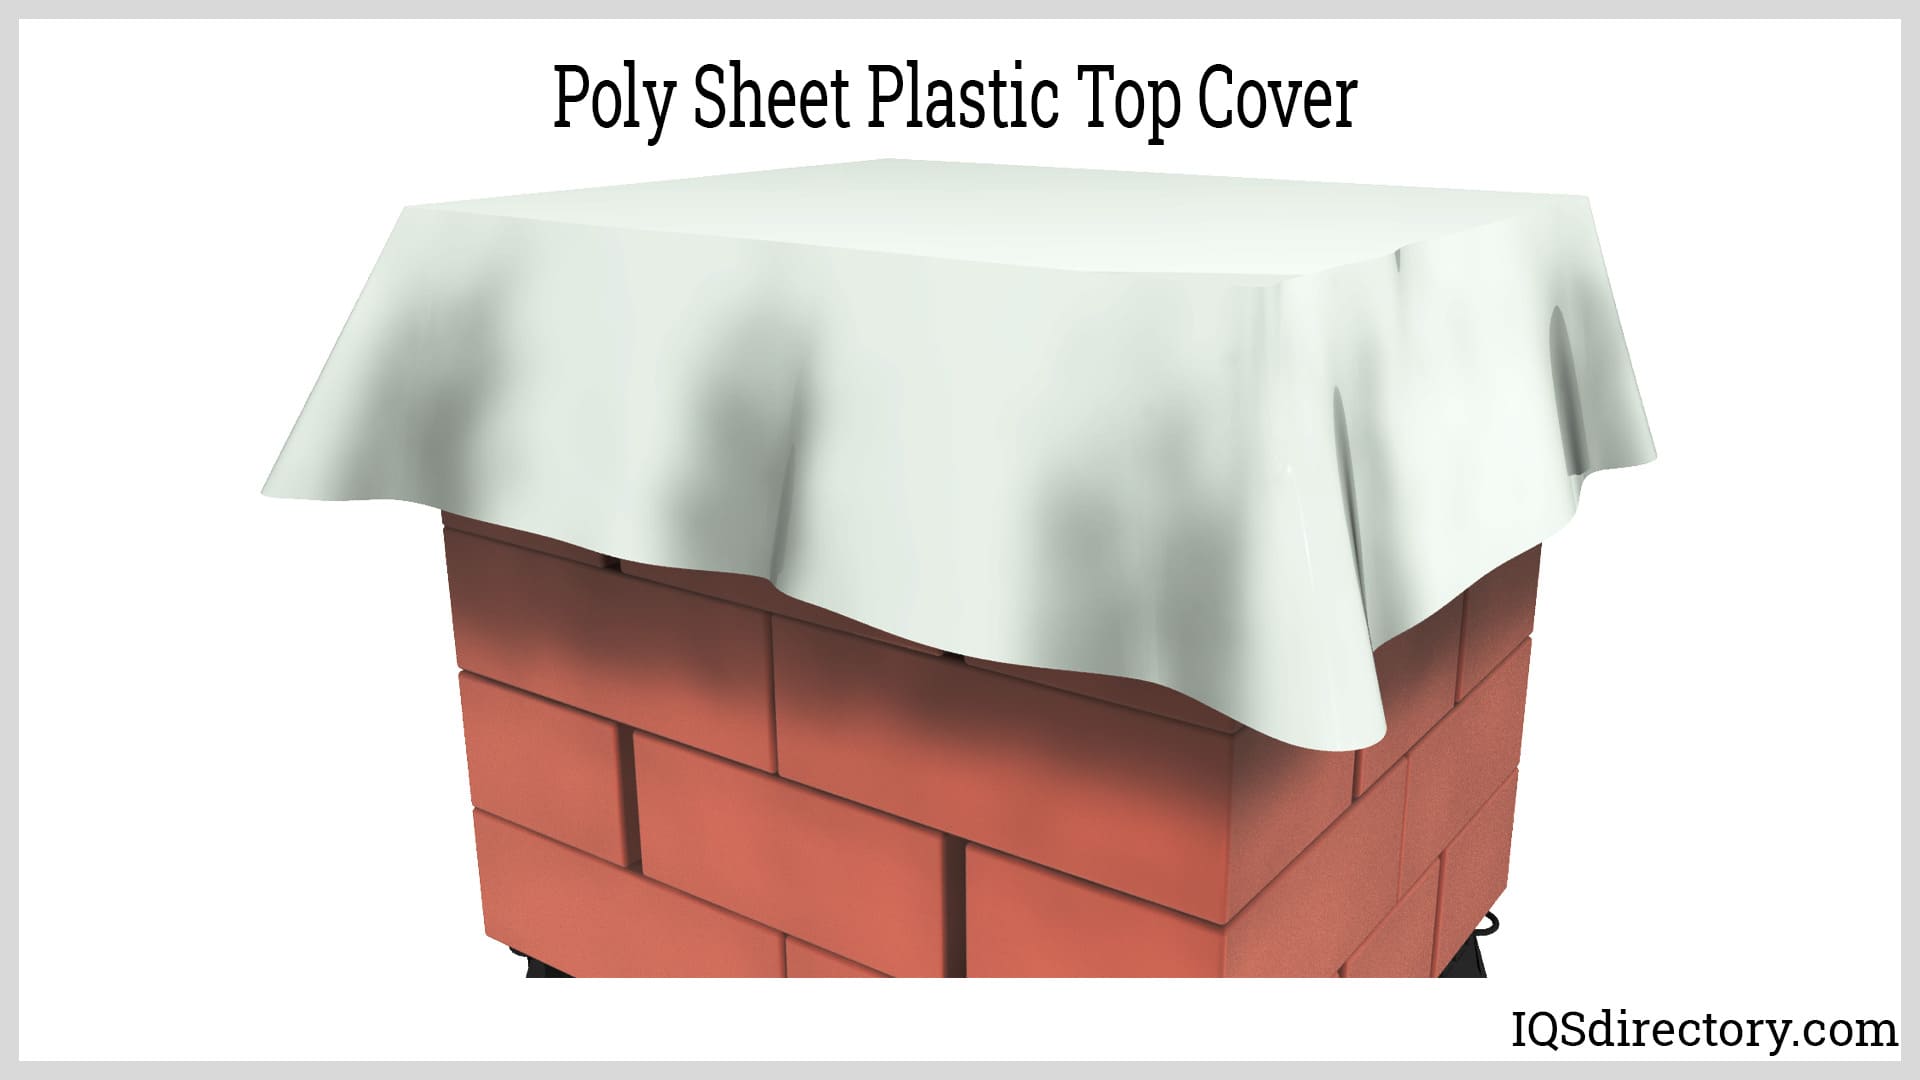 Poly Sheet Plastic Top Cover